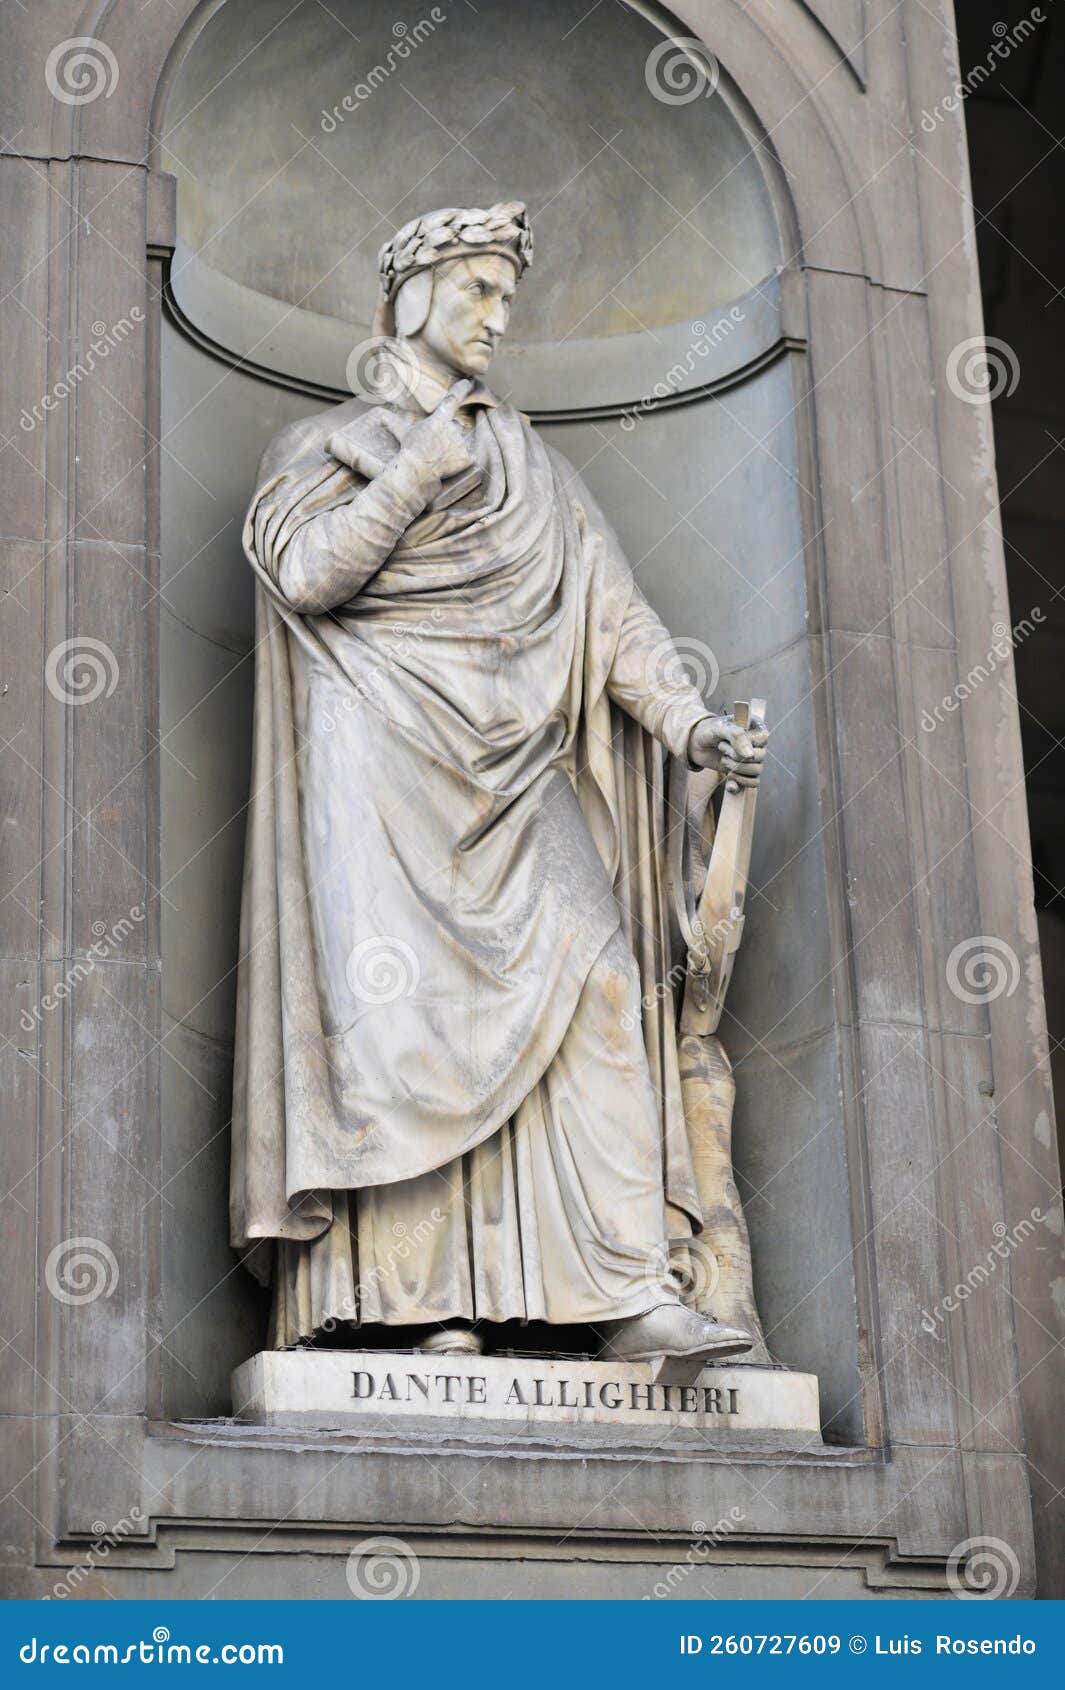 famous white marble monument of dante alighieri by enrico pazzi in piazza santa croce, next to basilica of santa croce, florence,